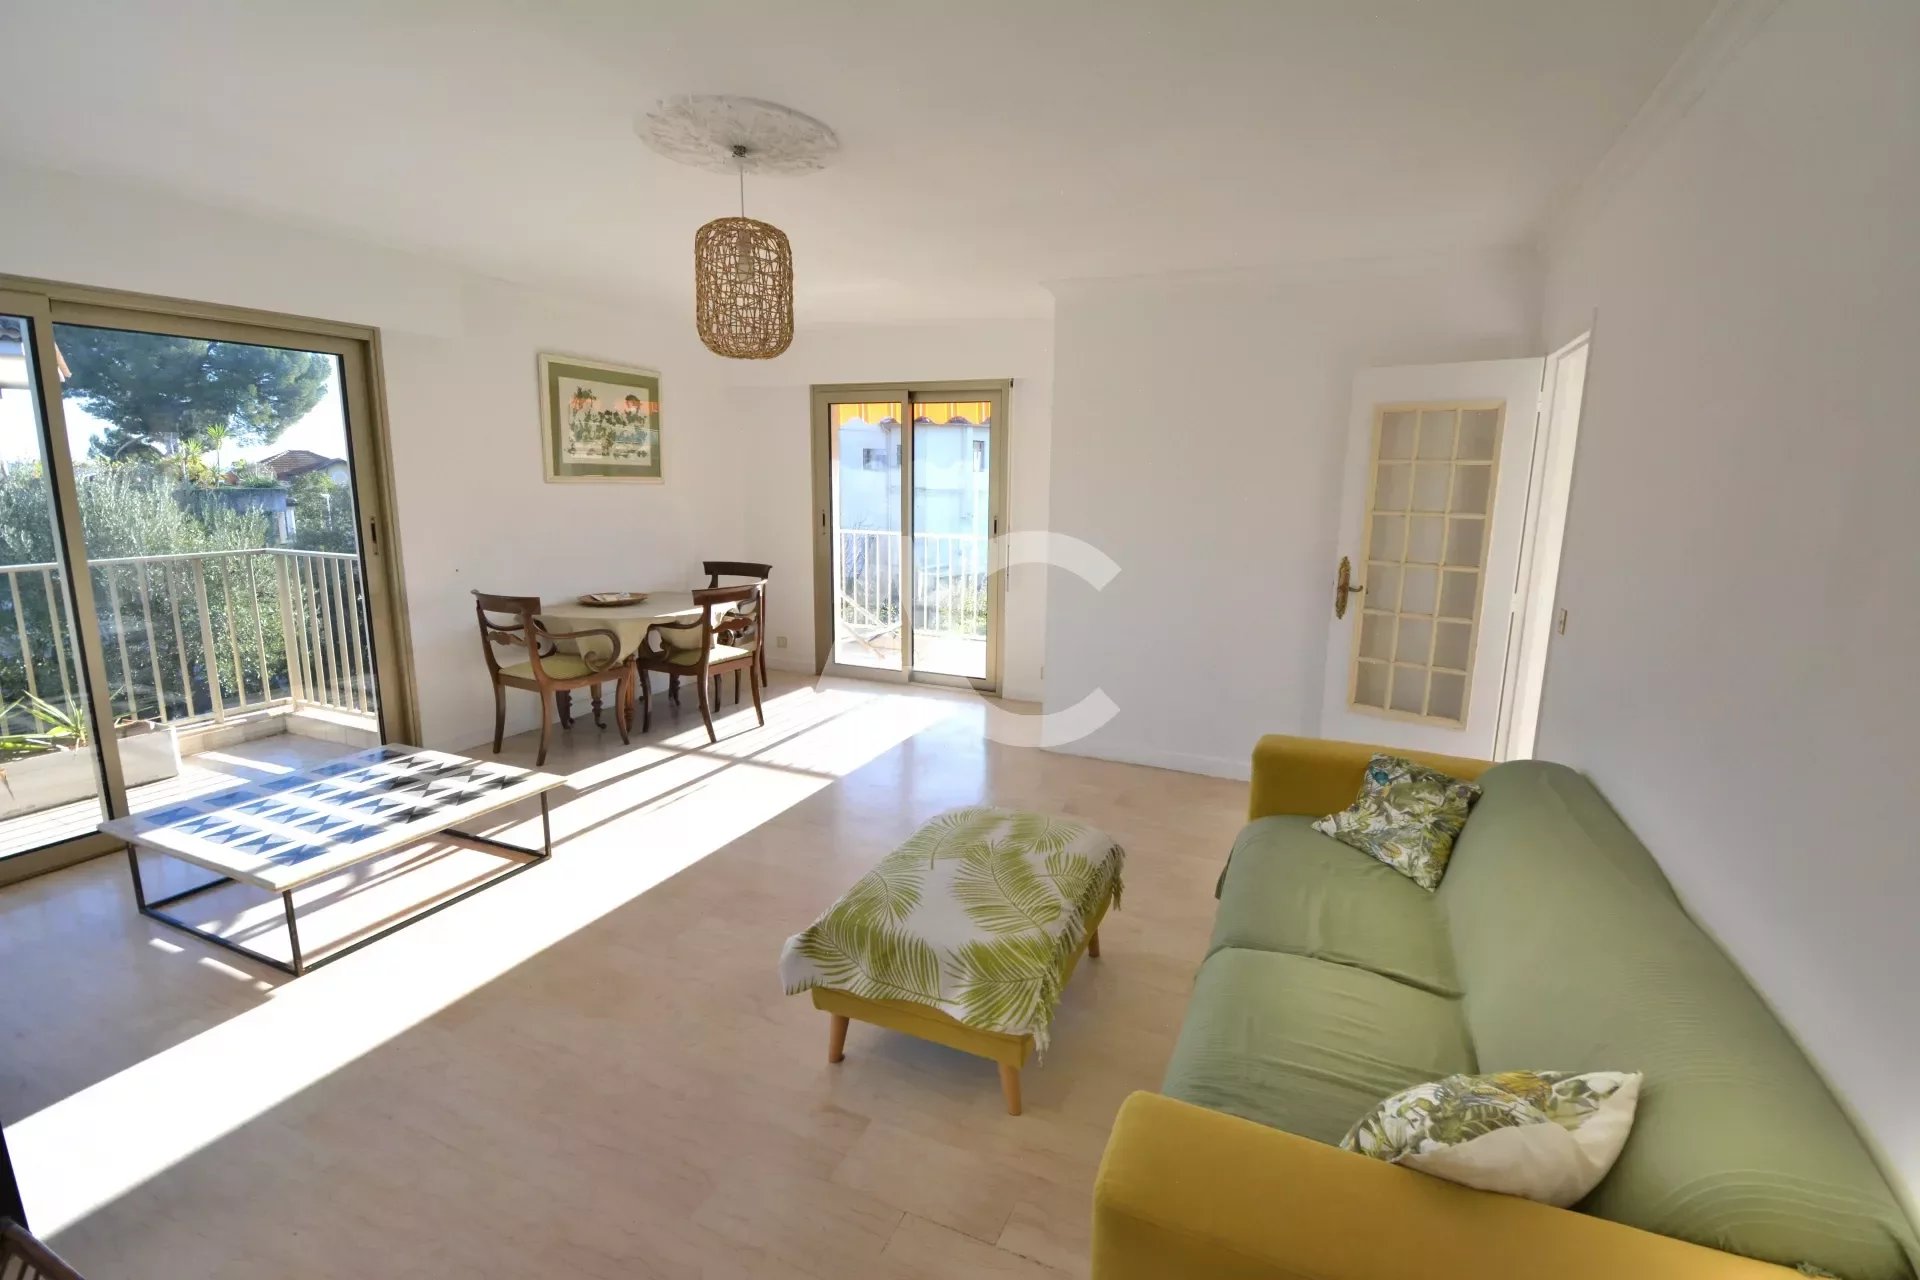 CAP D'ANTIBES - SUPERB TWO BEDROOMS APARTMENT WITH GARAGE